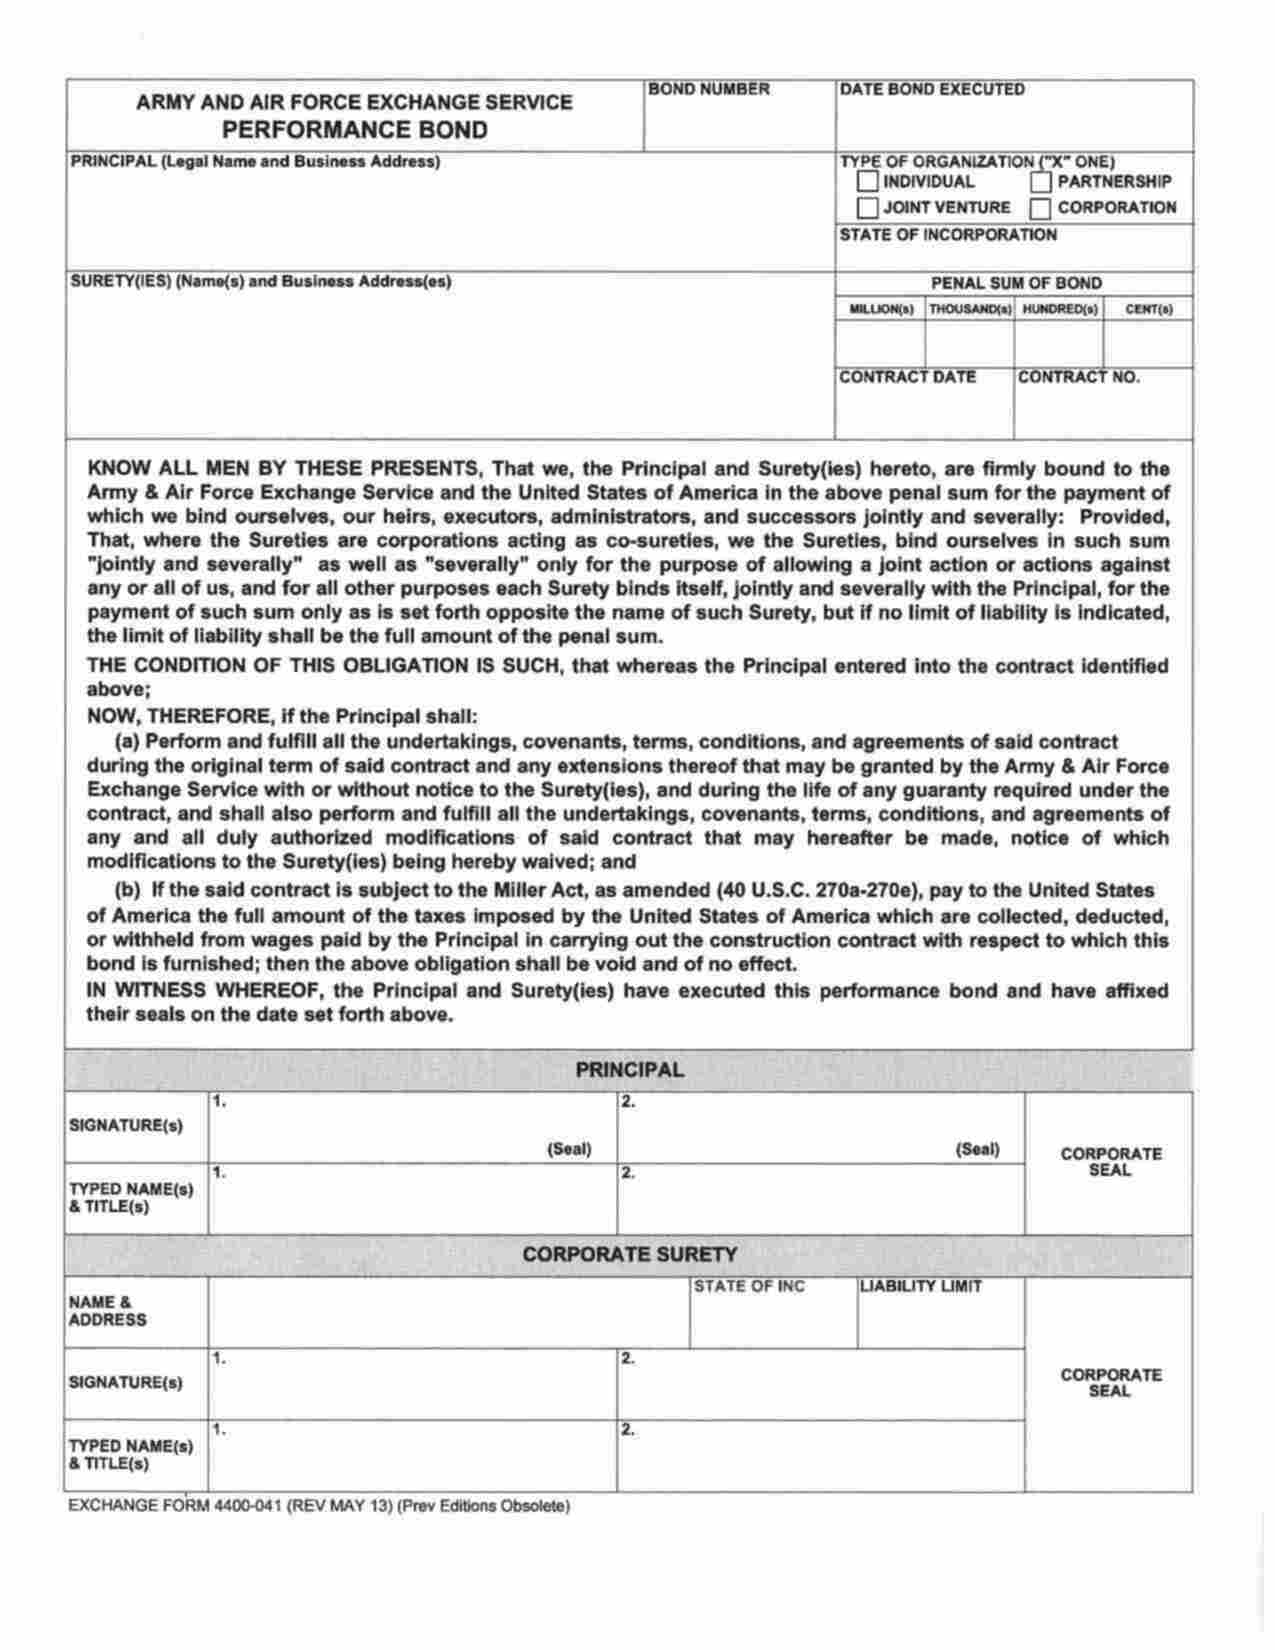 Federal U.S. Army and Air Force Exchange Service Performance Bond Form